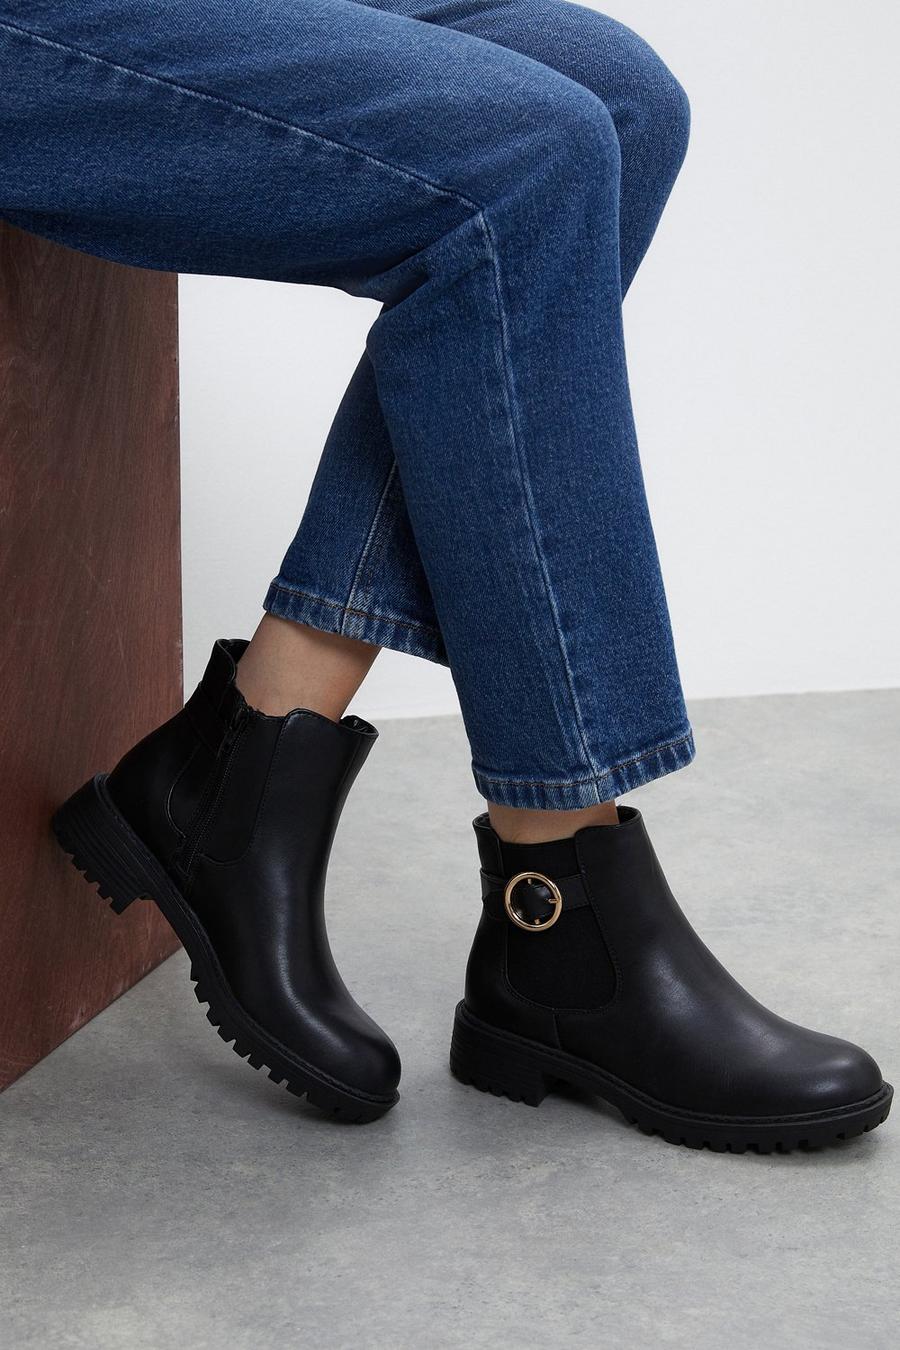 Good For The Sole: Mira Comfort Chelsea Boots